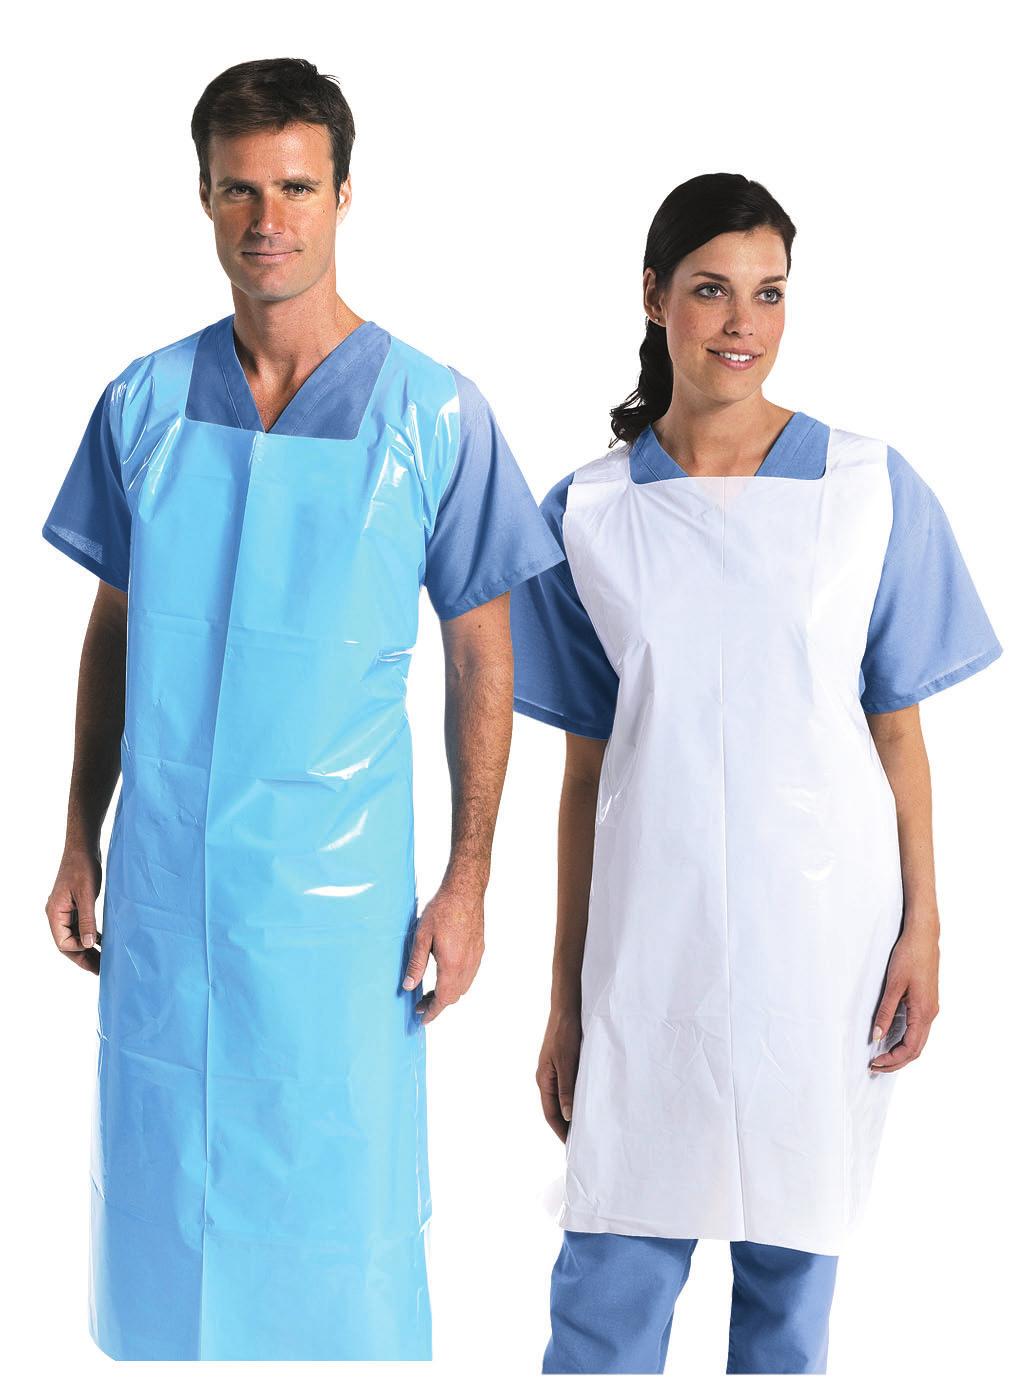 Lab Jackets/Aprons Classic Lab Jackets with Knit Collar and Knit Cuffs Made from fluid-resistant multi-layer material. Anti-static Lab Jacket reaches just below the waist.